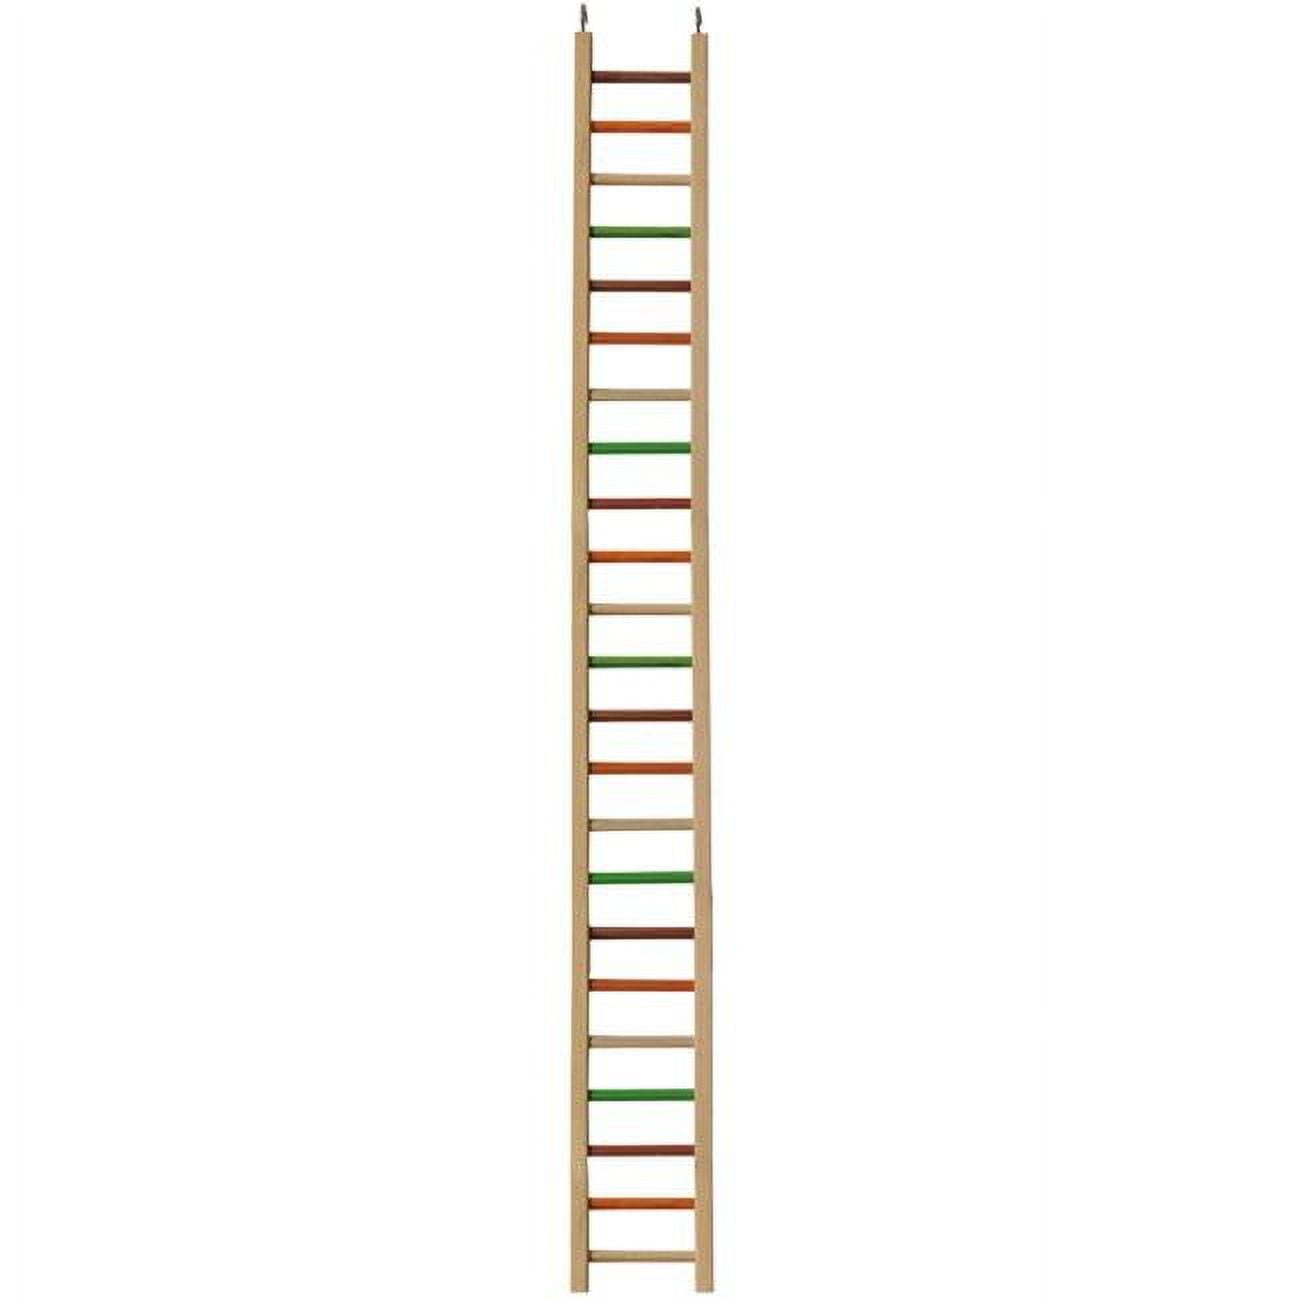 Hb46421 Wooden Hanging Ladder - 50 X 5.25 - 0.5 In.